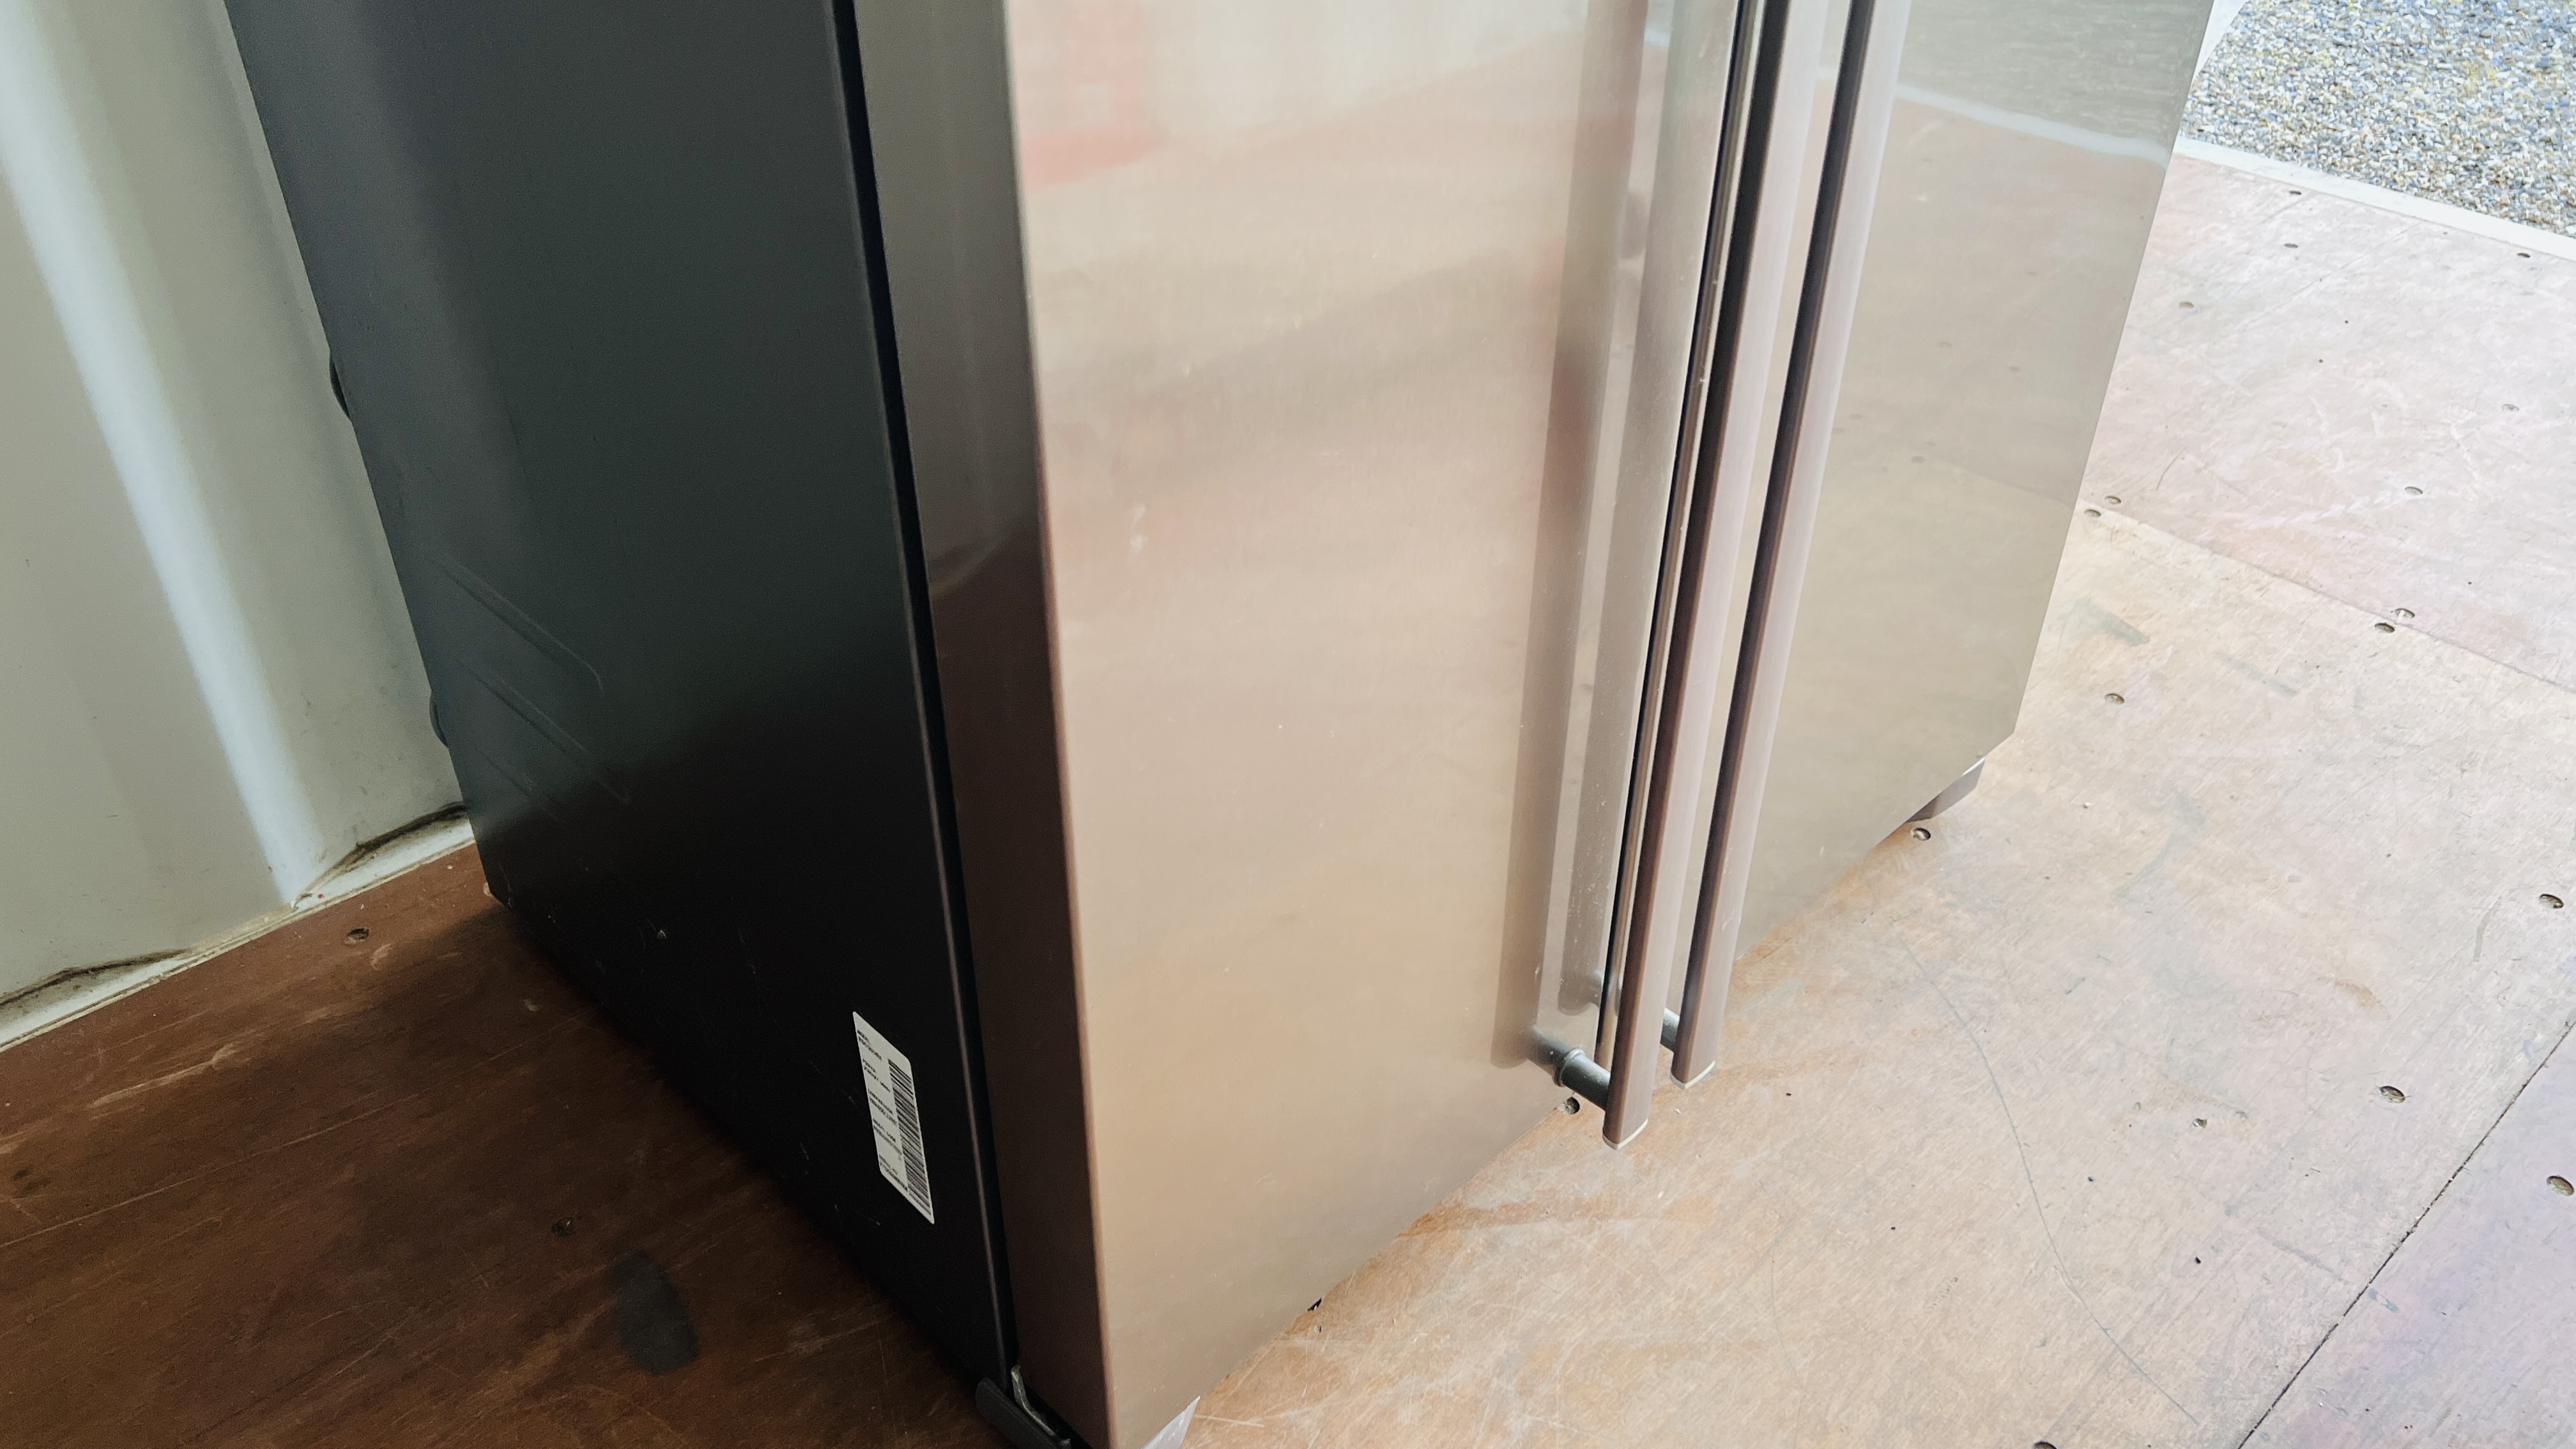 A SAMSUNG AMERICAN STYLE FRIDGE WITH ICED WATER MACHINE - SOLD AS SEEN - Image 4 of 16